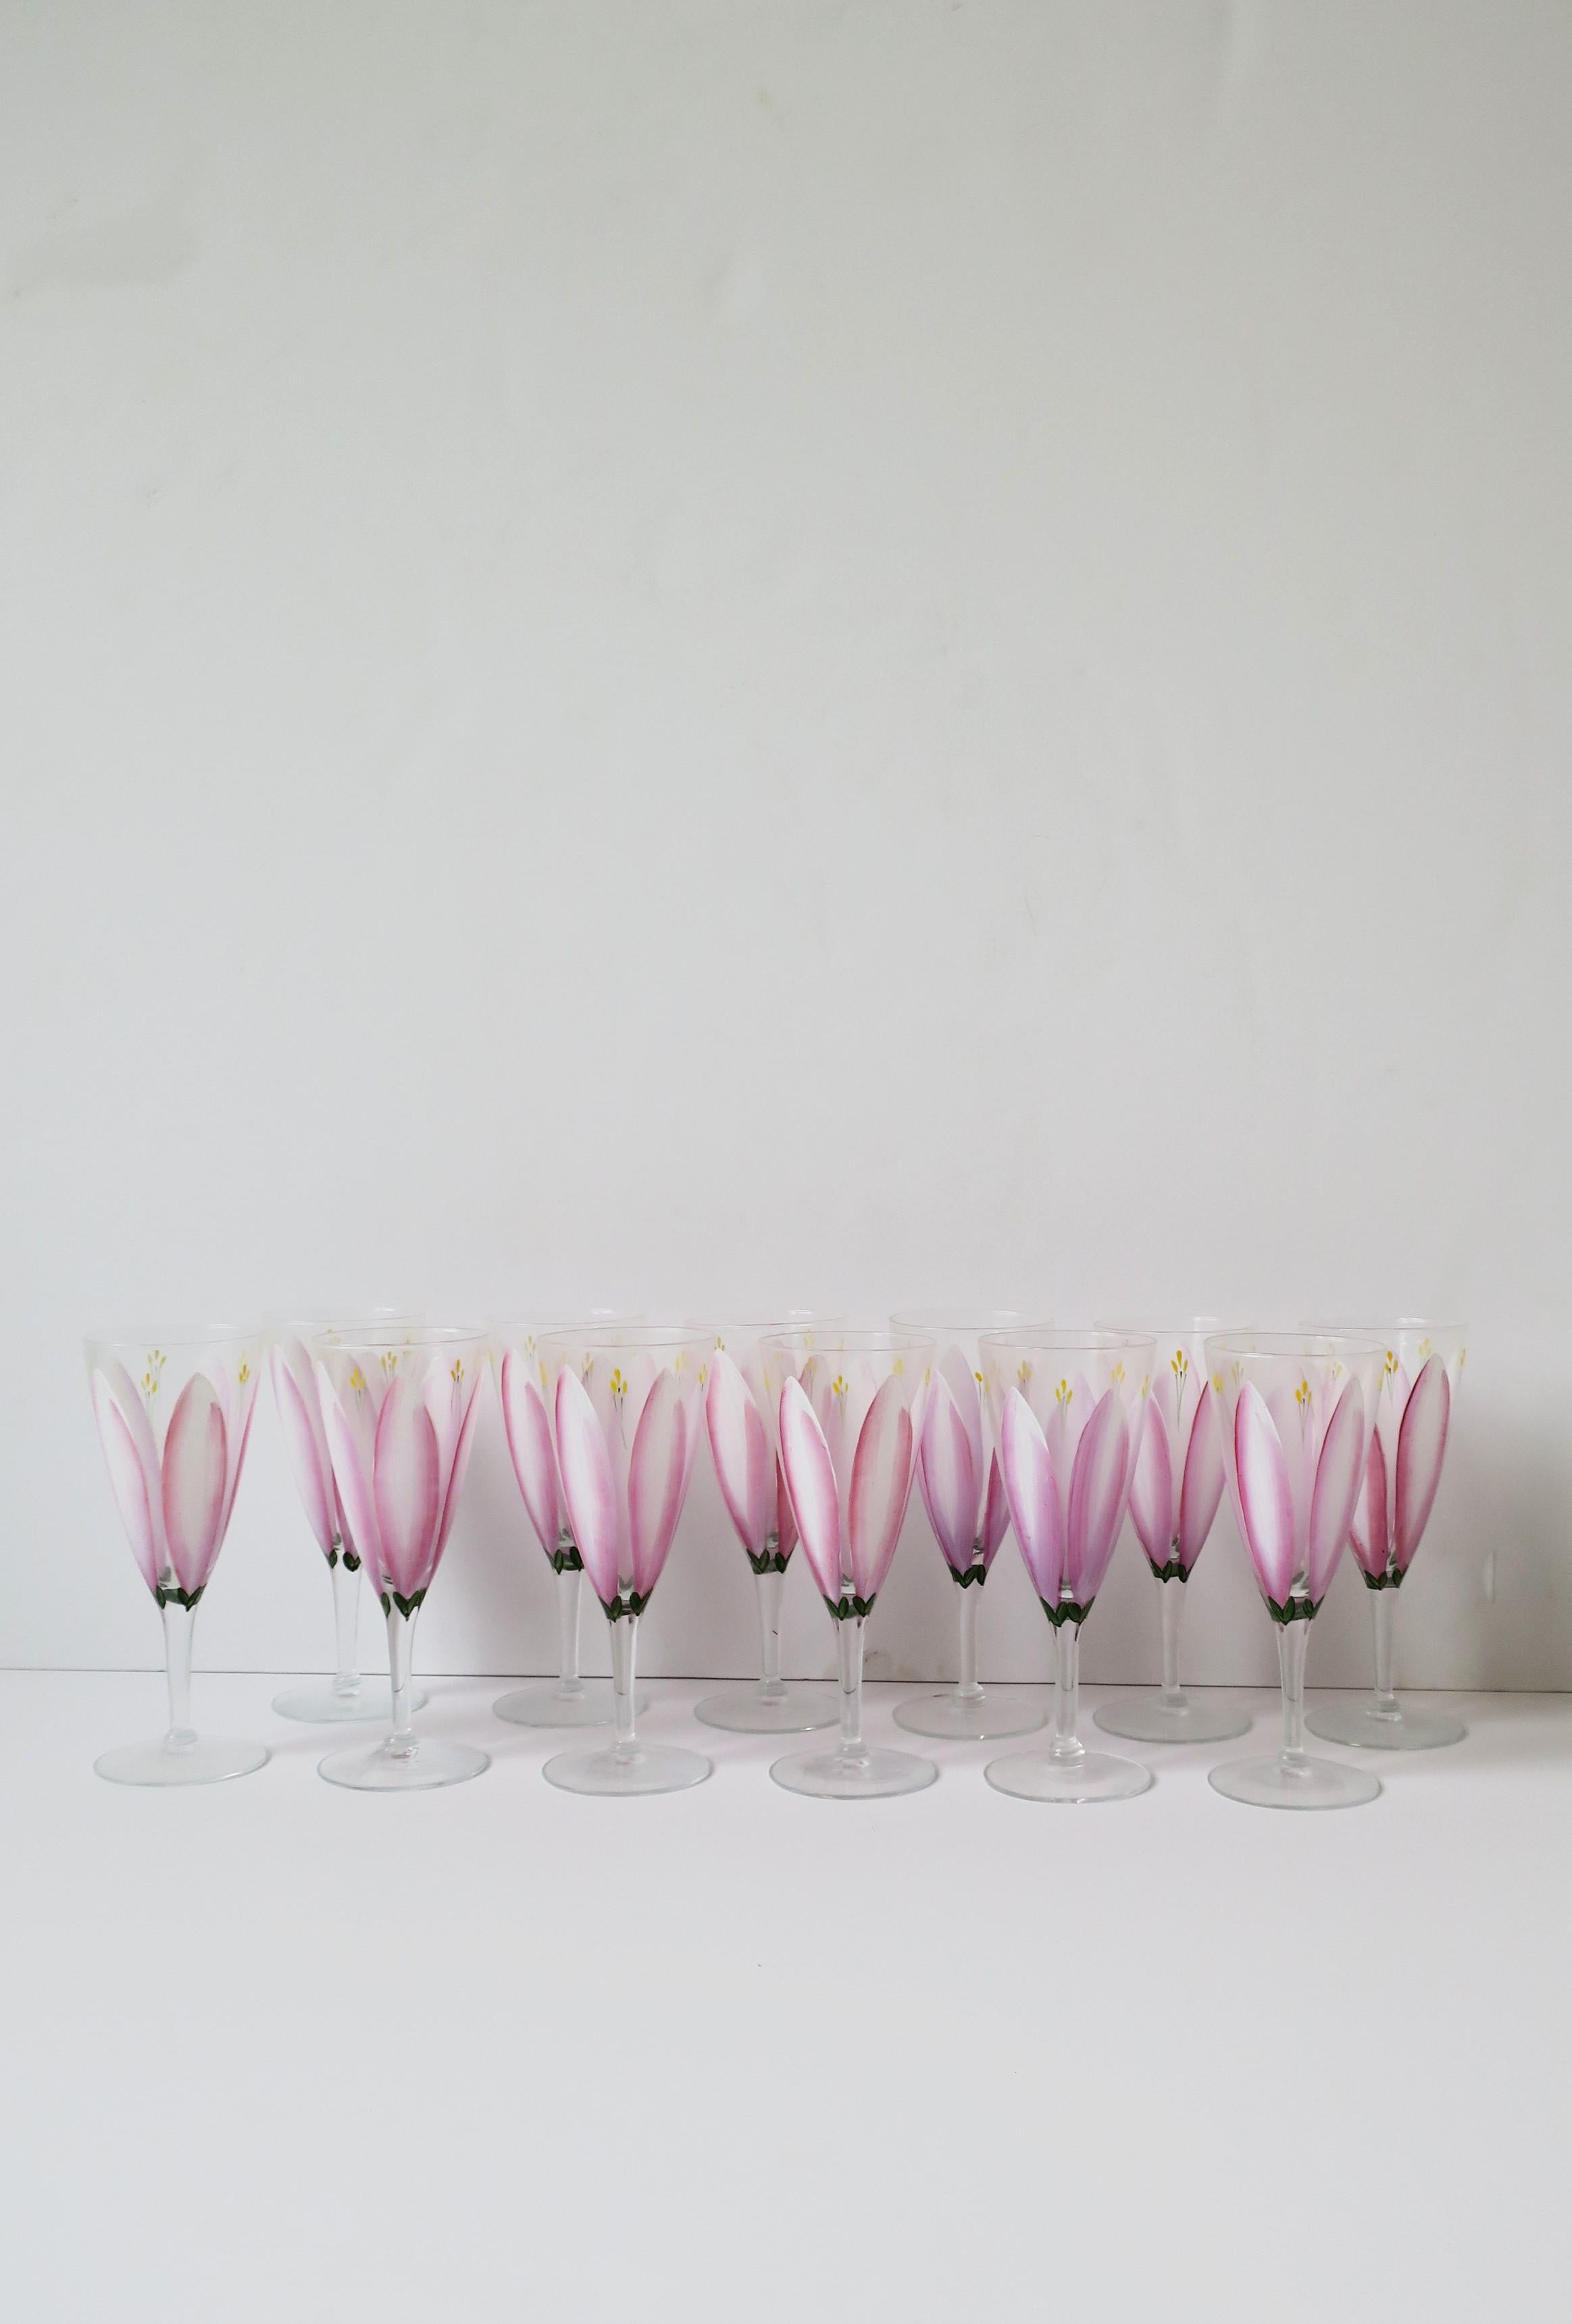 Champagne Flutes Glasses Hand Painted Pink Tulip Flower Design, Set of 12 In Good Condition For Sale In New York, NY